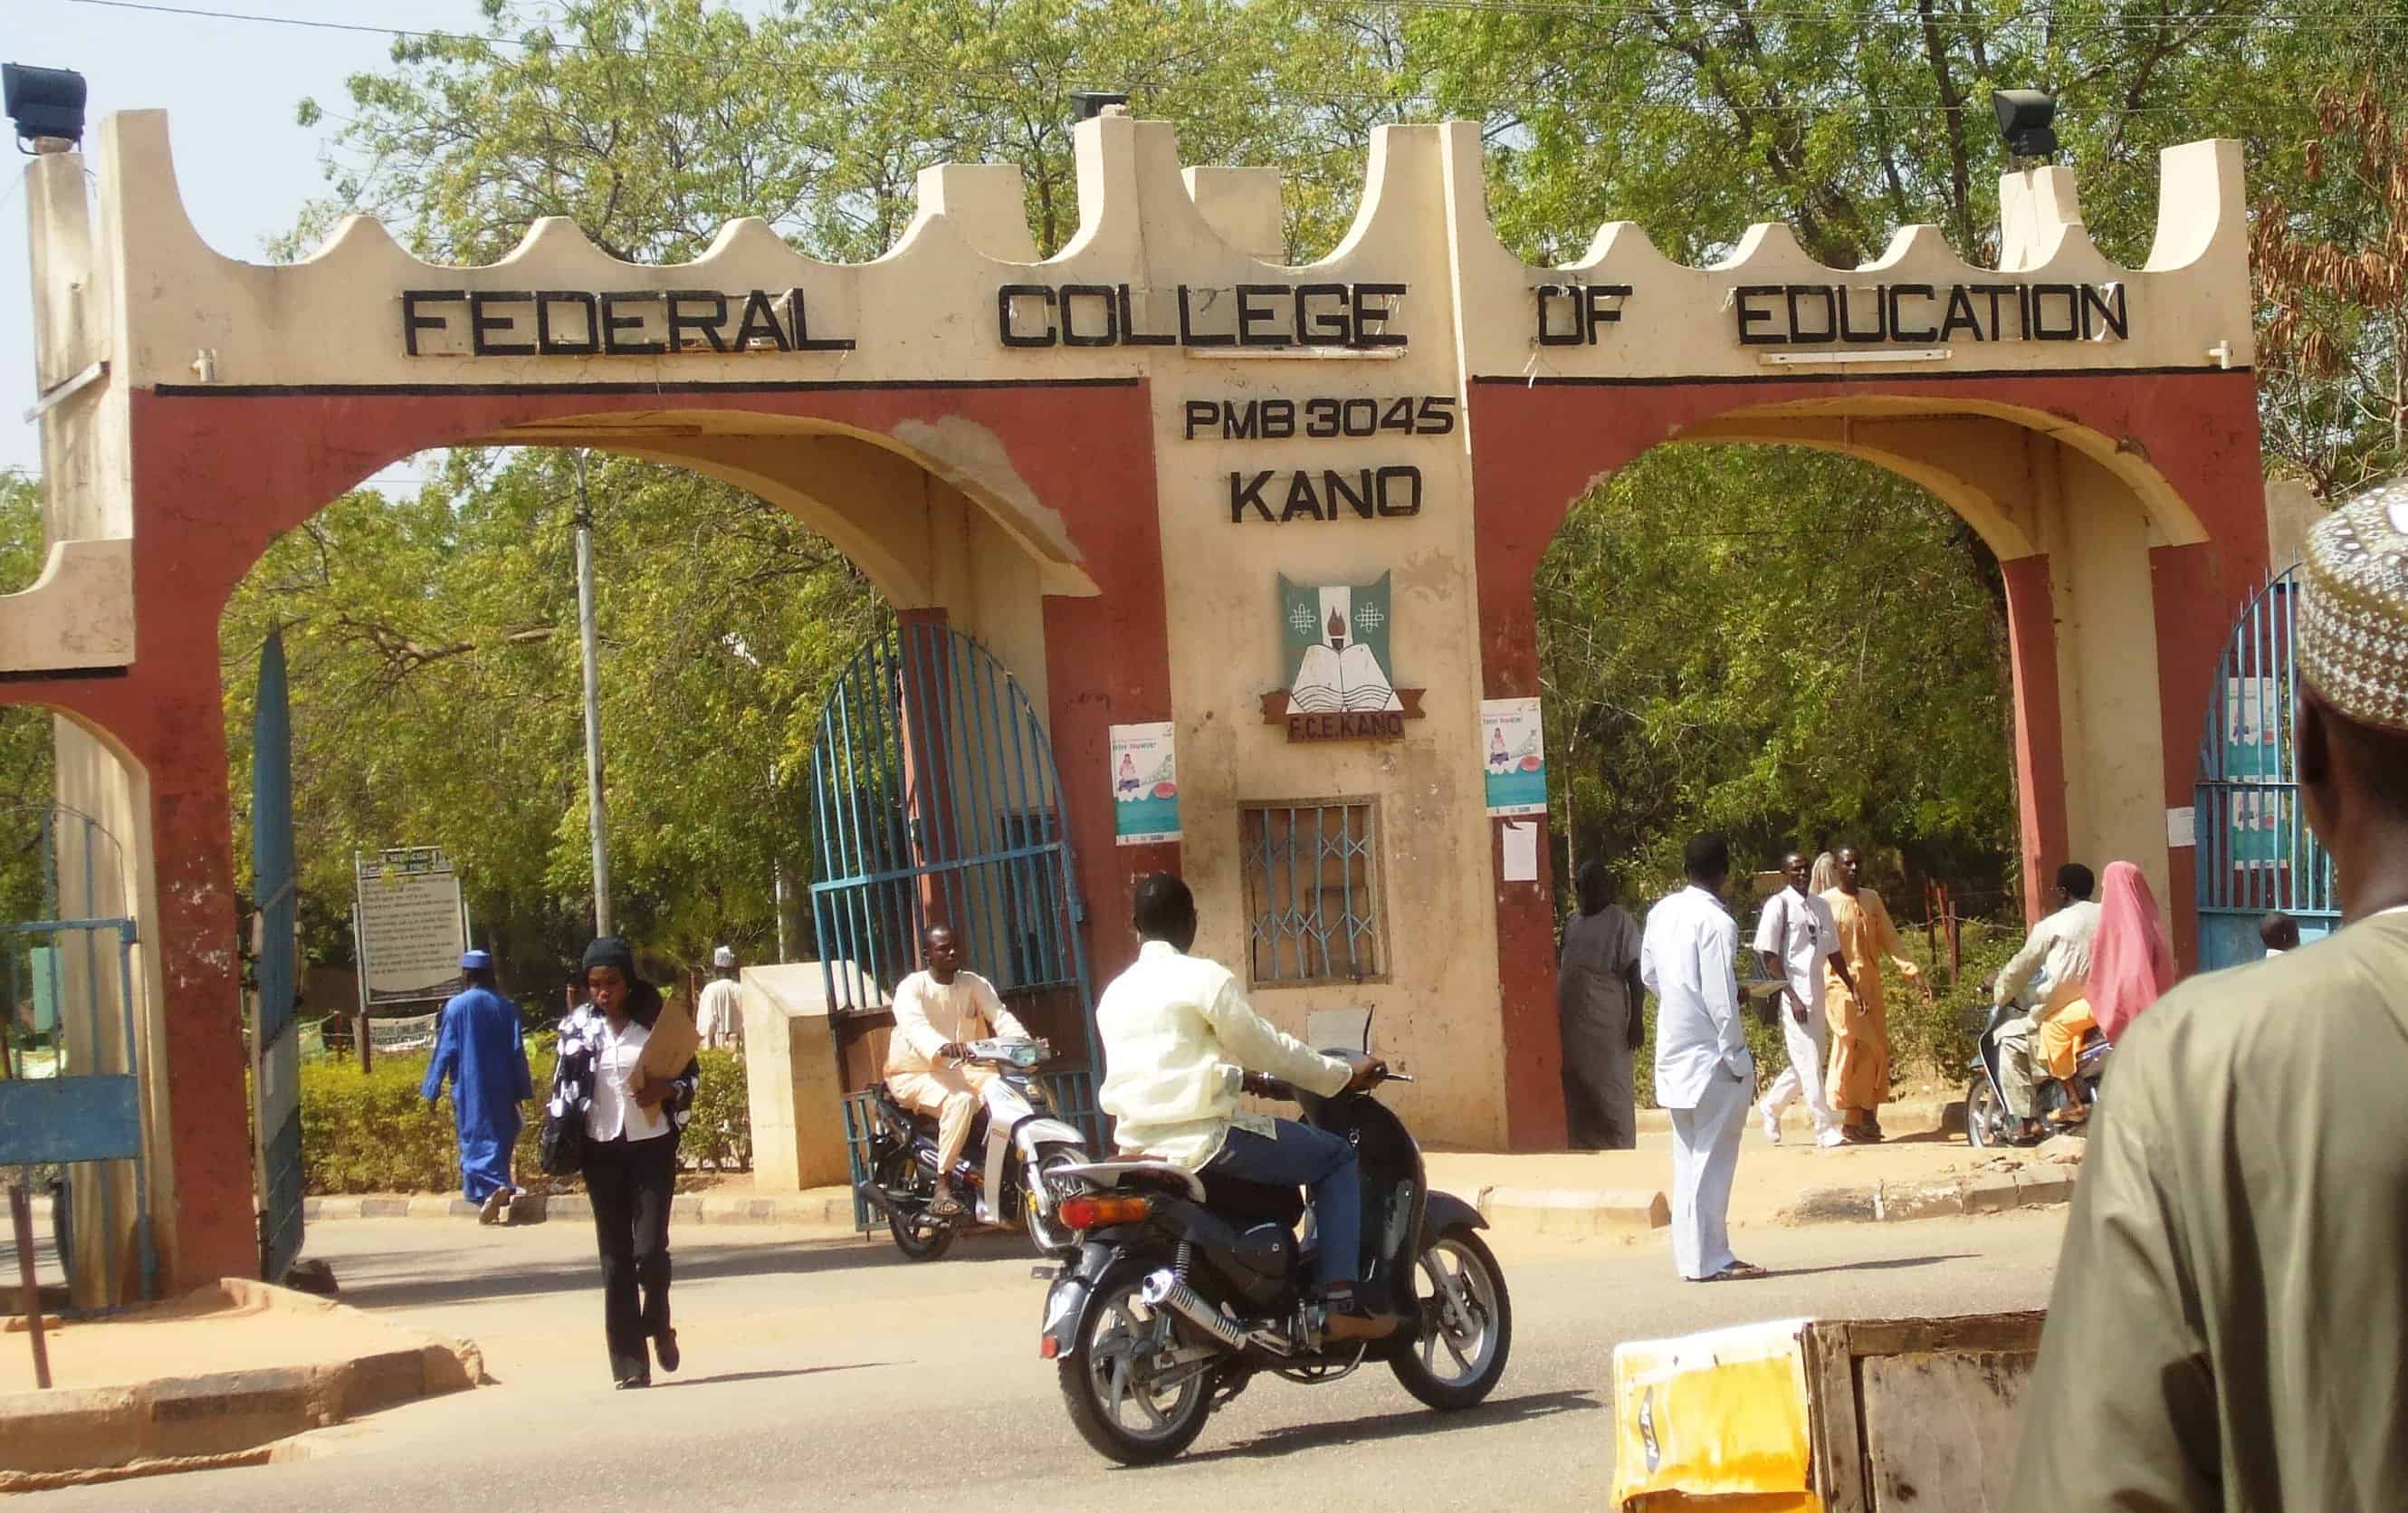 Federal College of Education (FCE) Kano Pre-NCE Admission Form